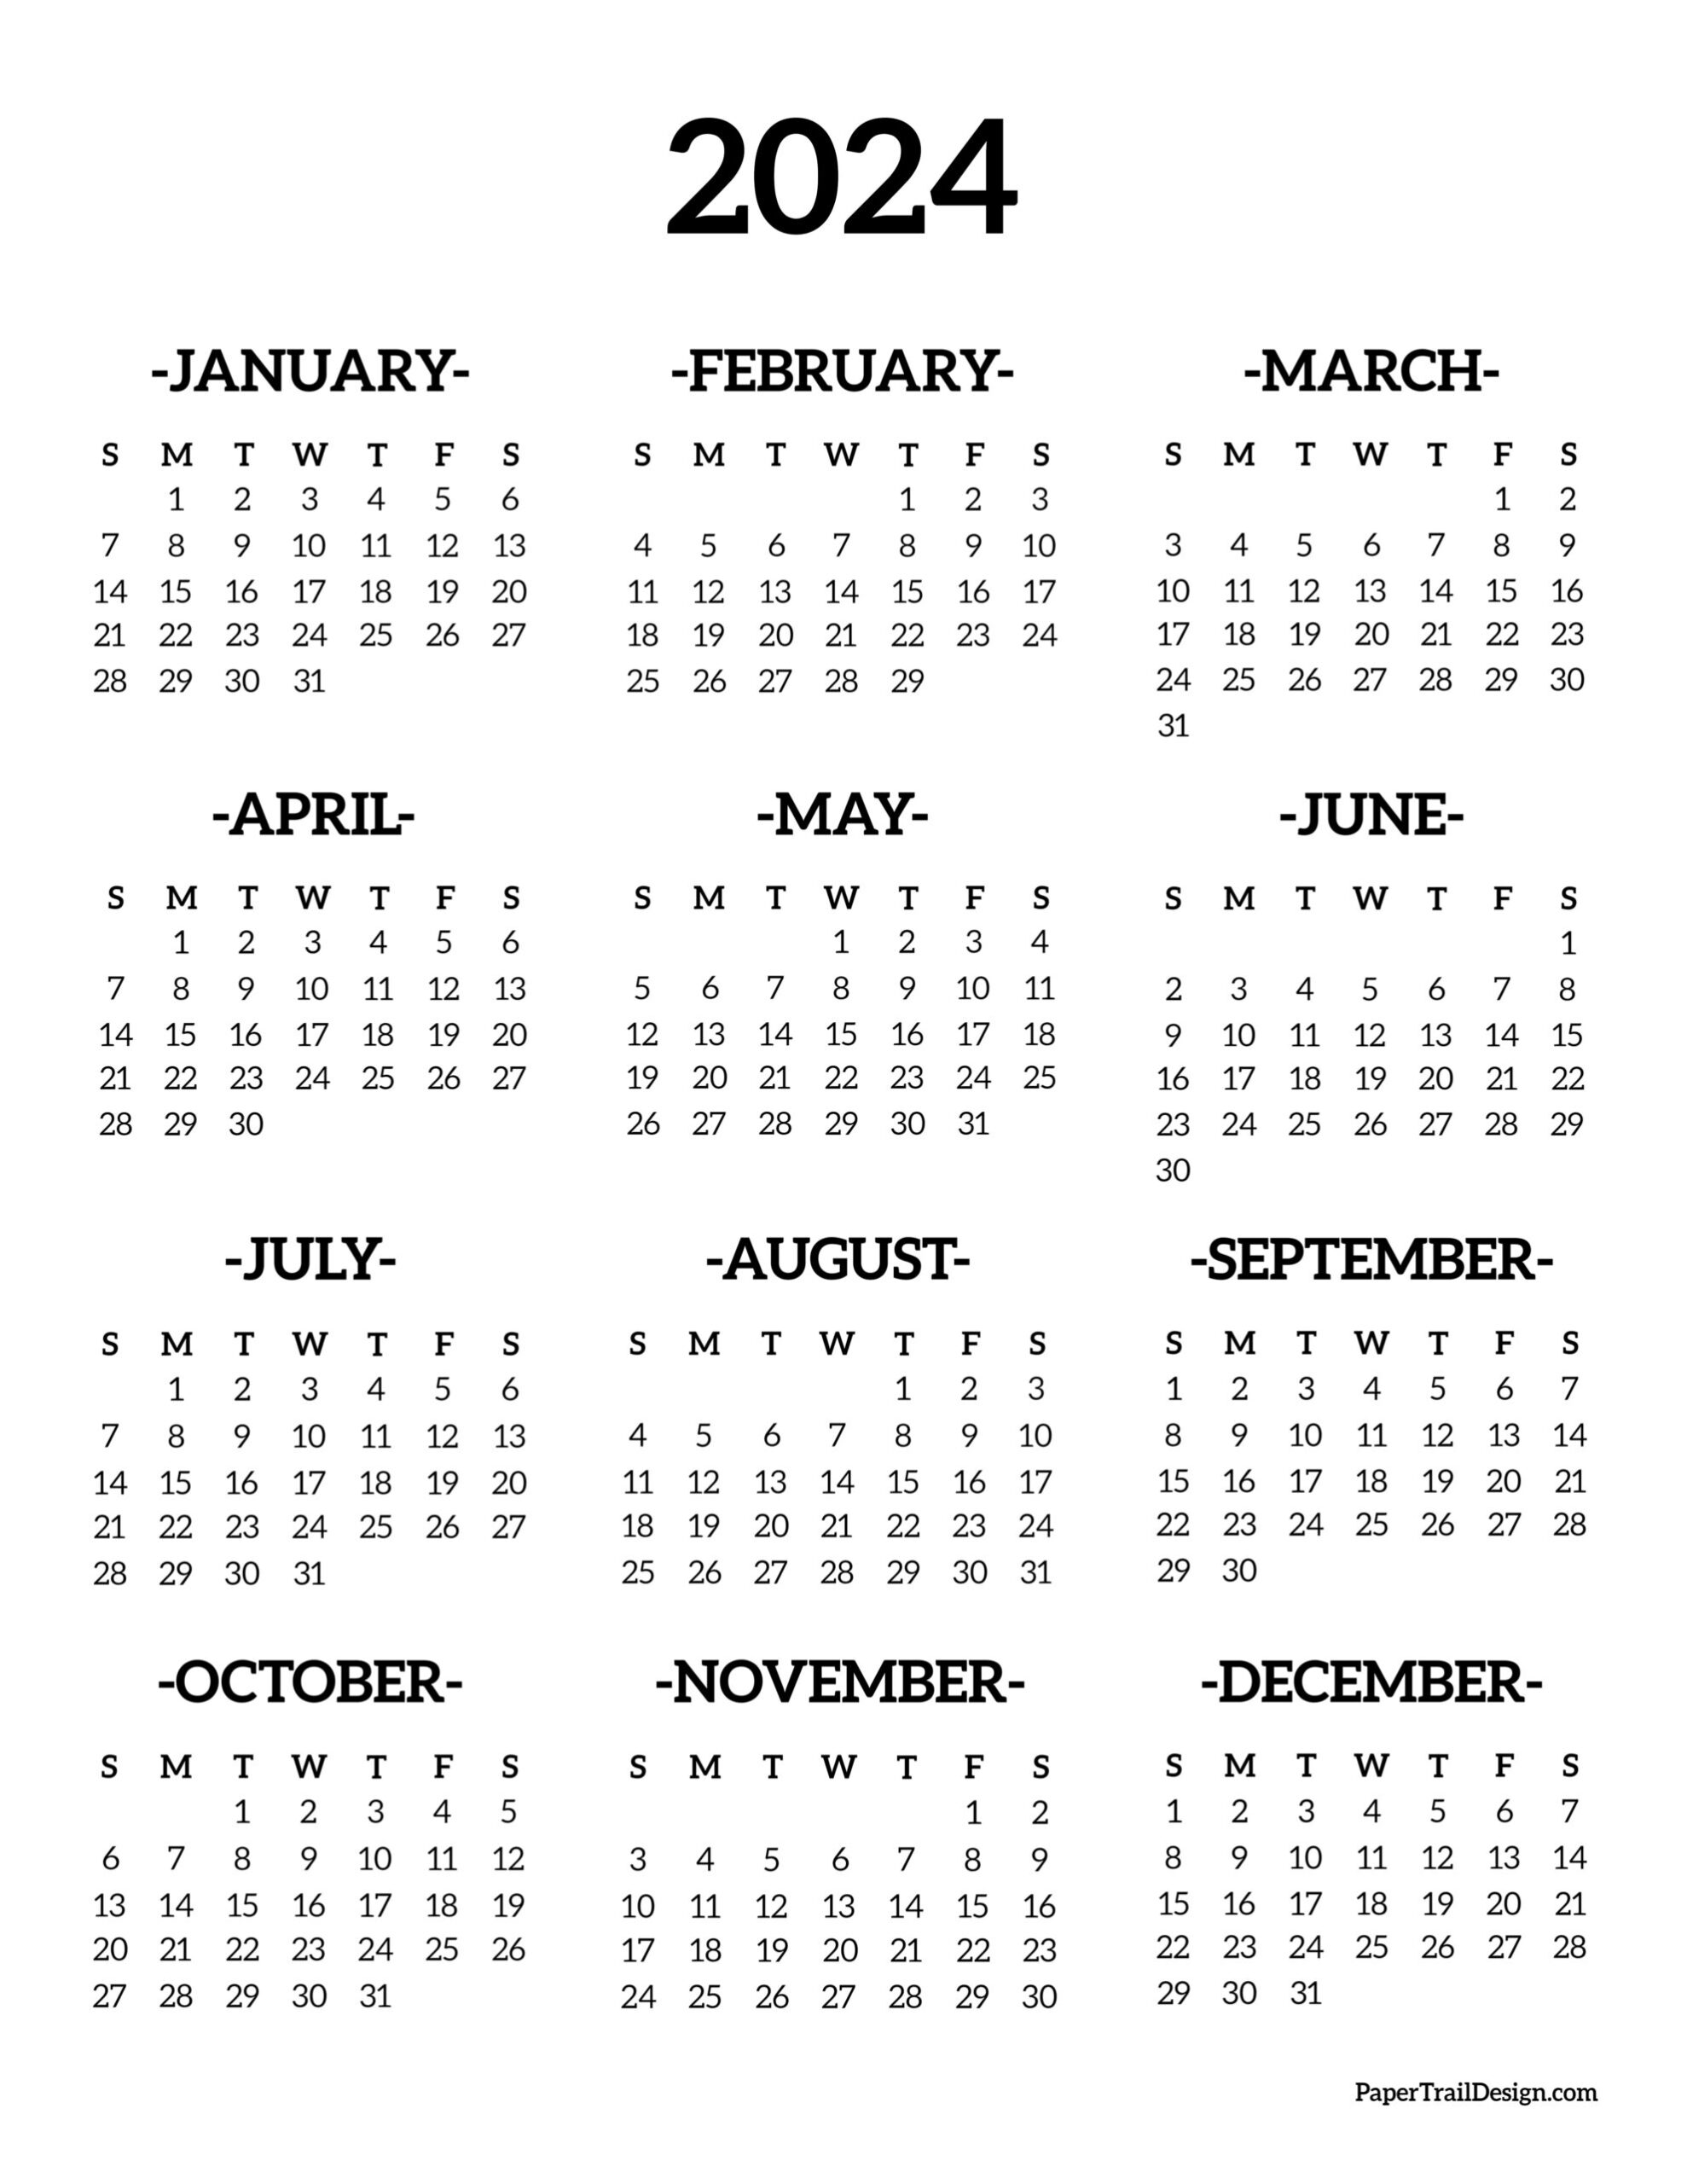 Calendar 2024 Printable One Page - Paper Trail Design for Printable 2024 Calendar Pages